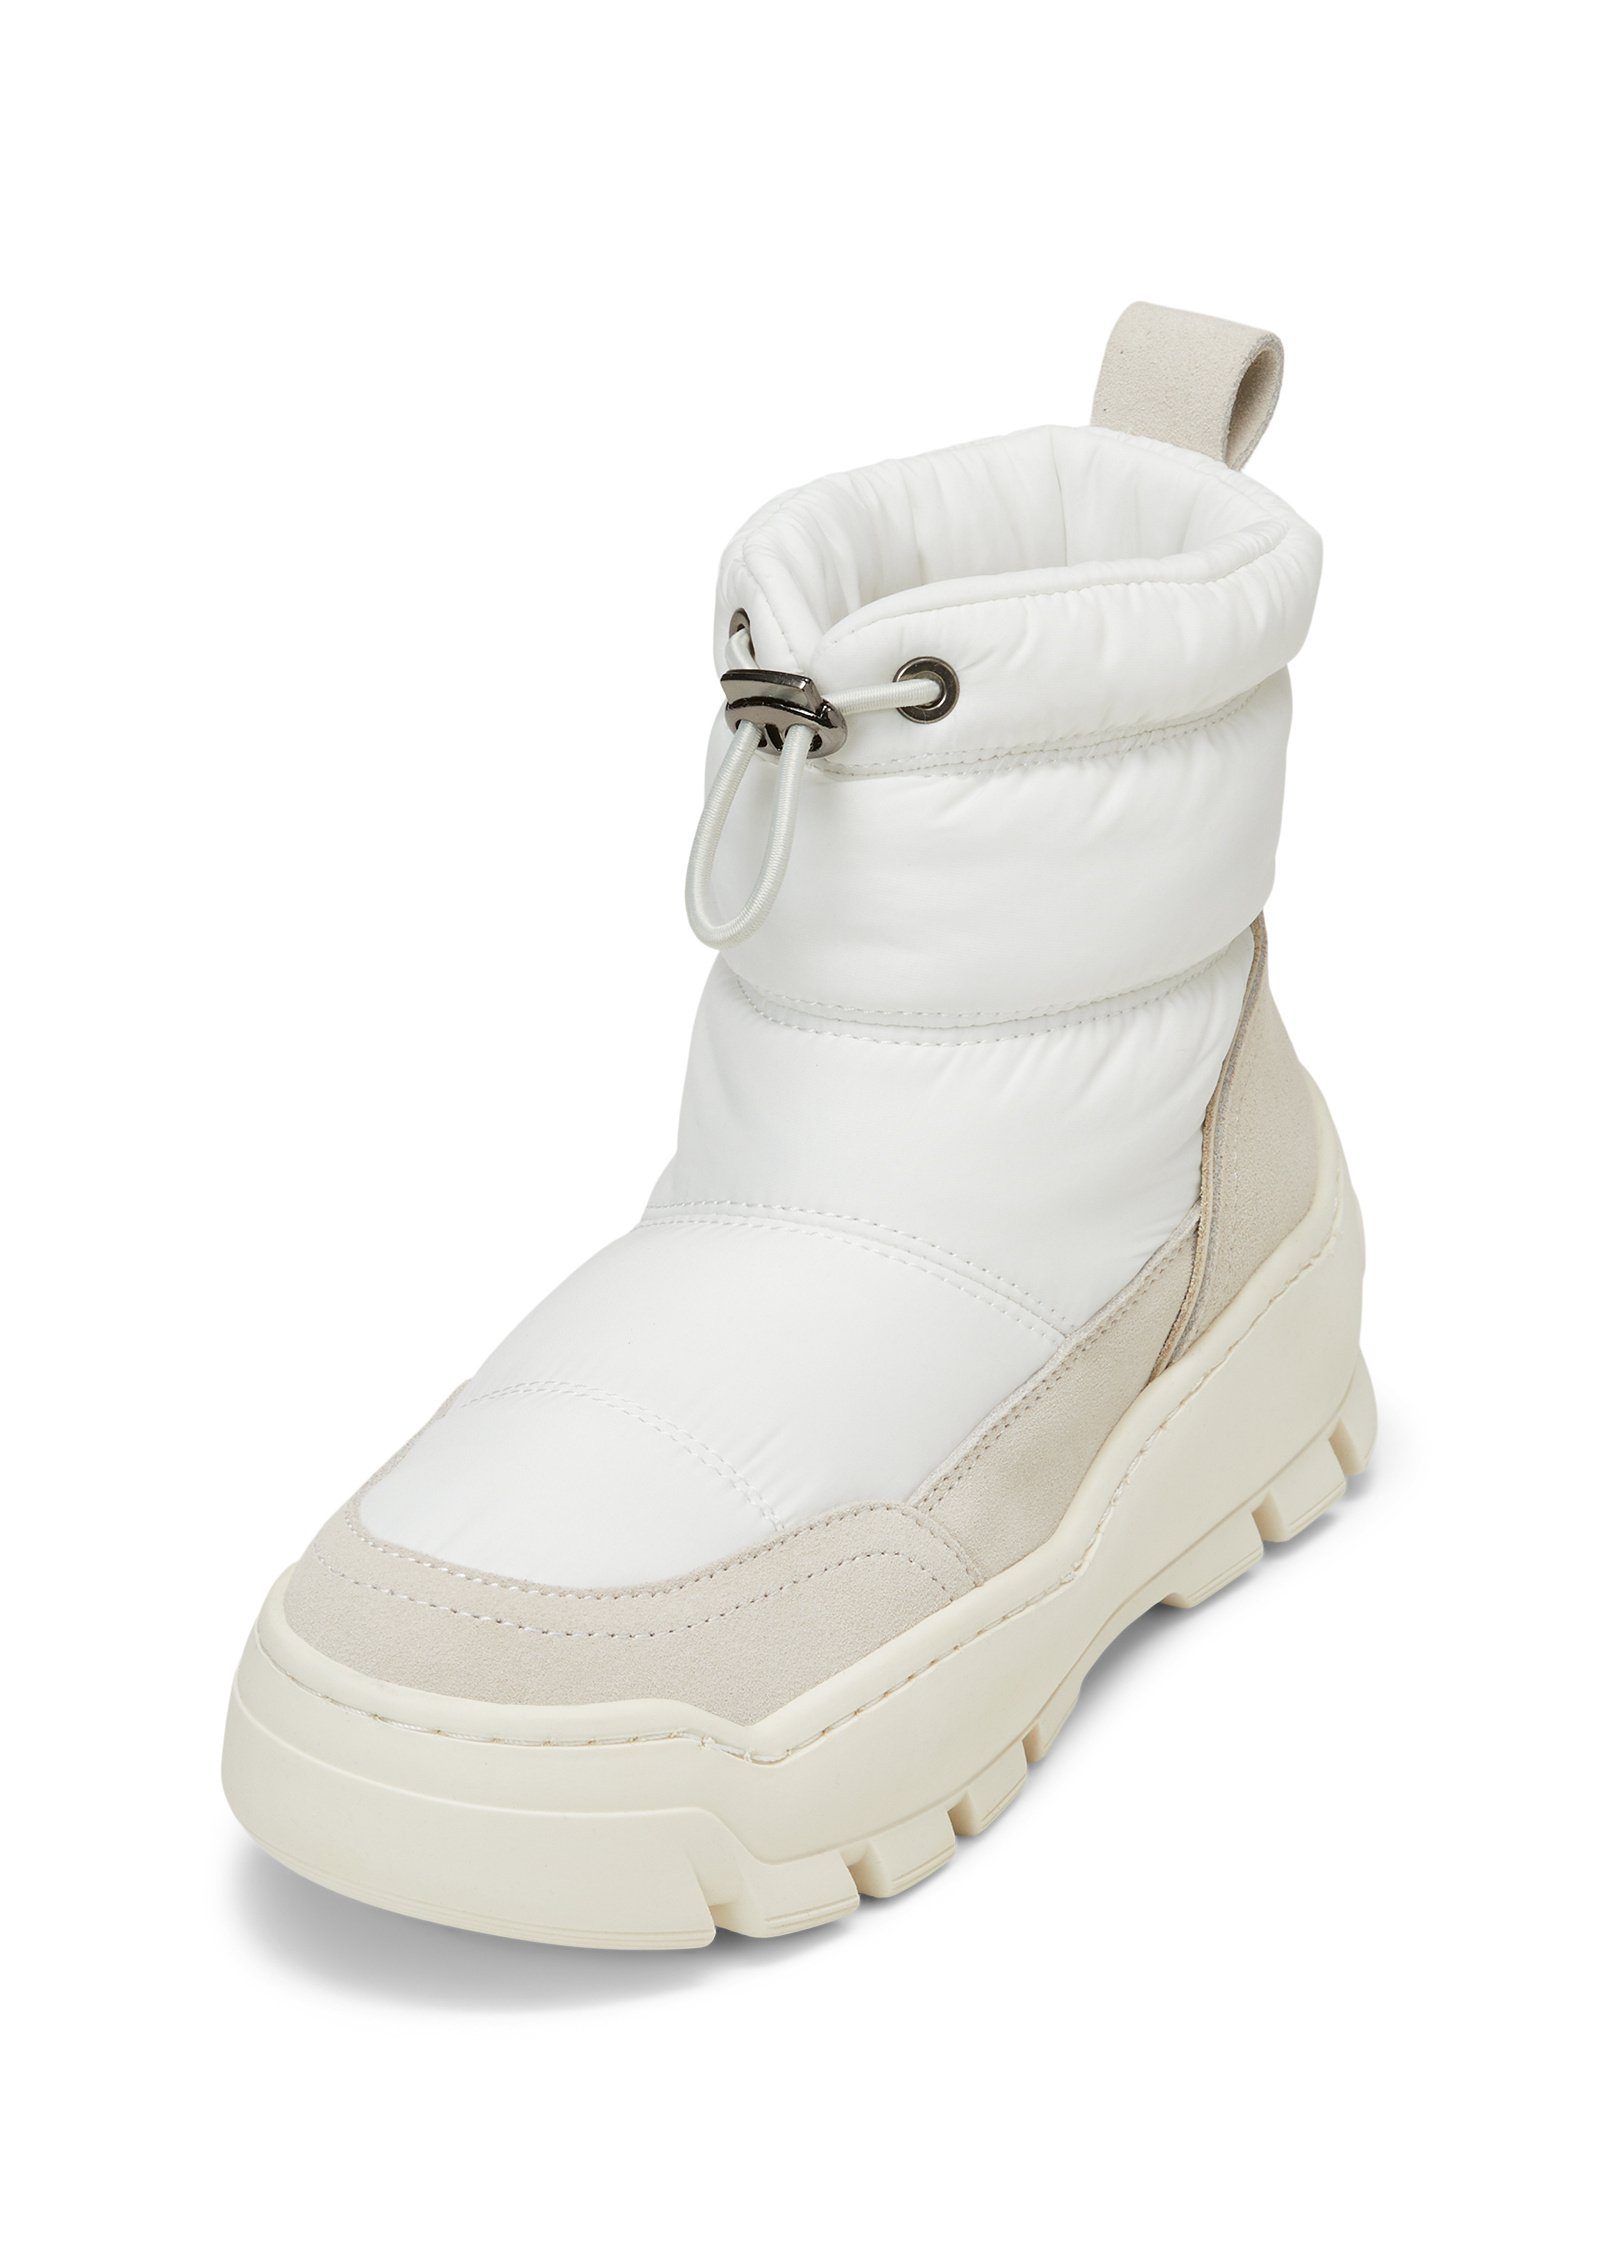 Marc O'Polo aus weiß recyceltem Winterboots Polyester